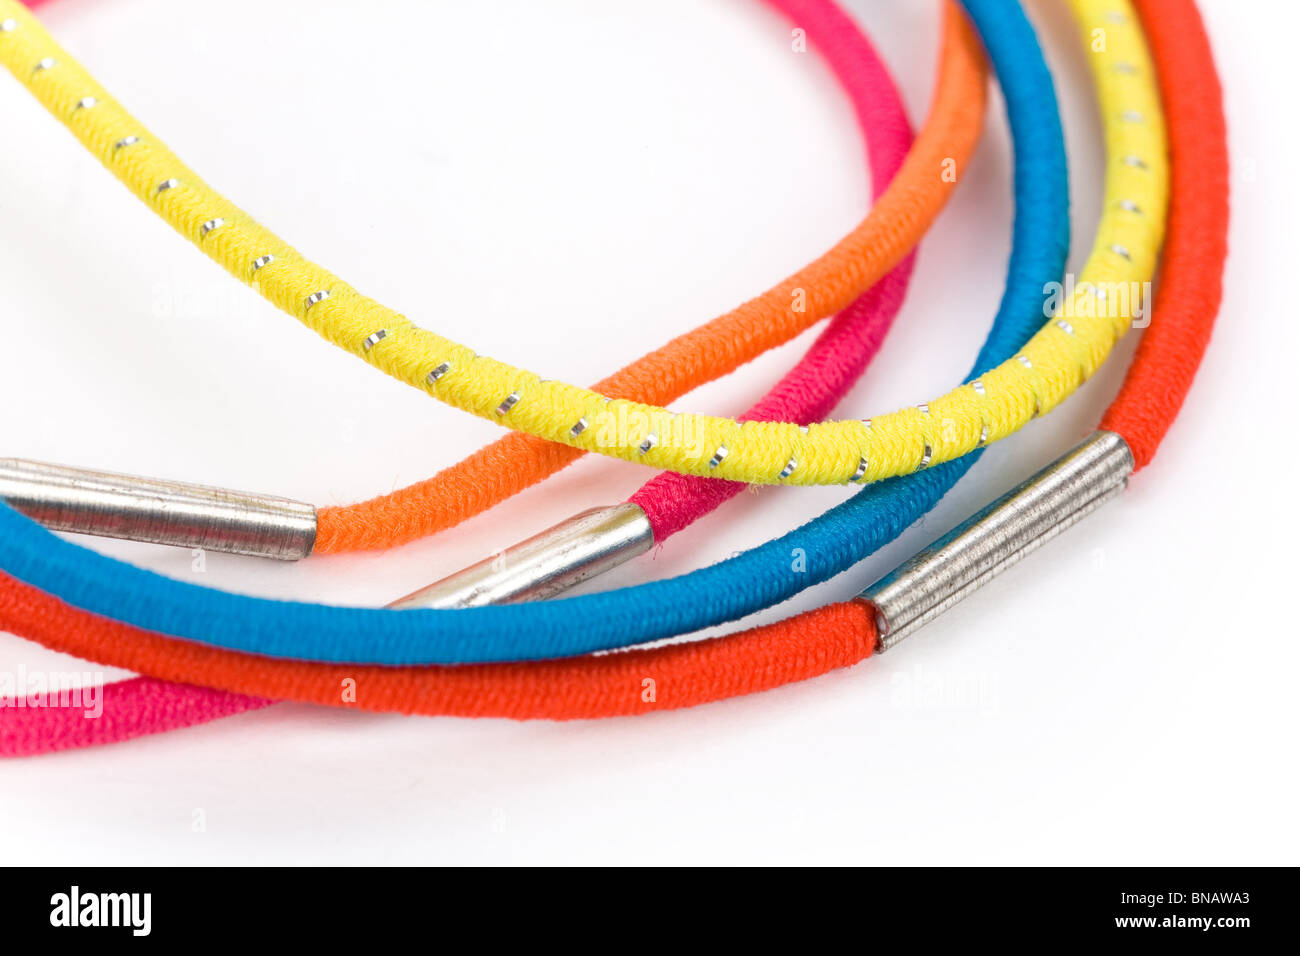 color rubber band close up shot Stock Photo